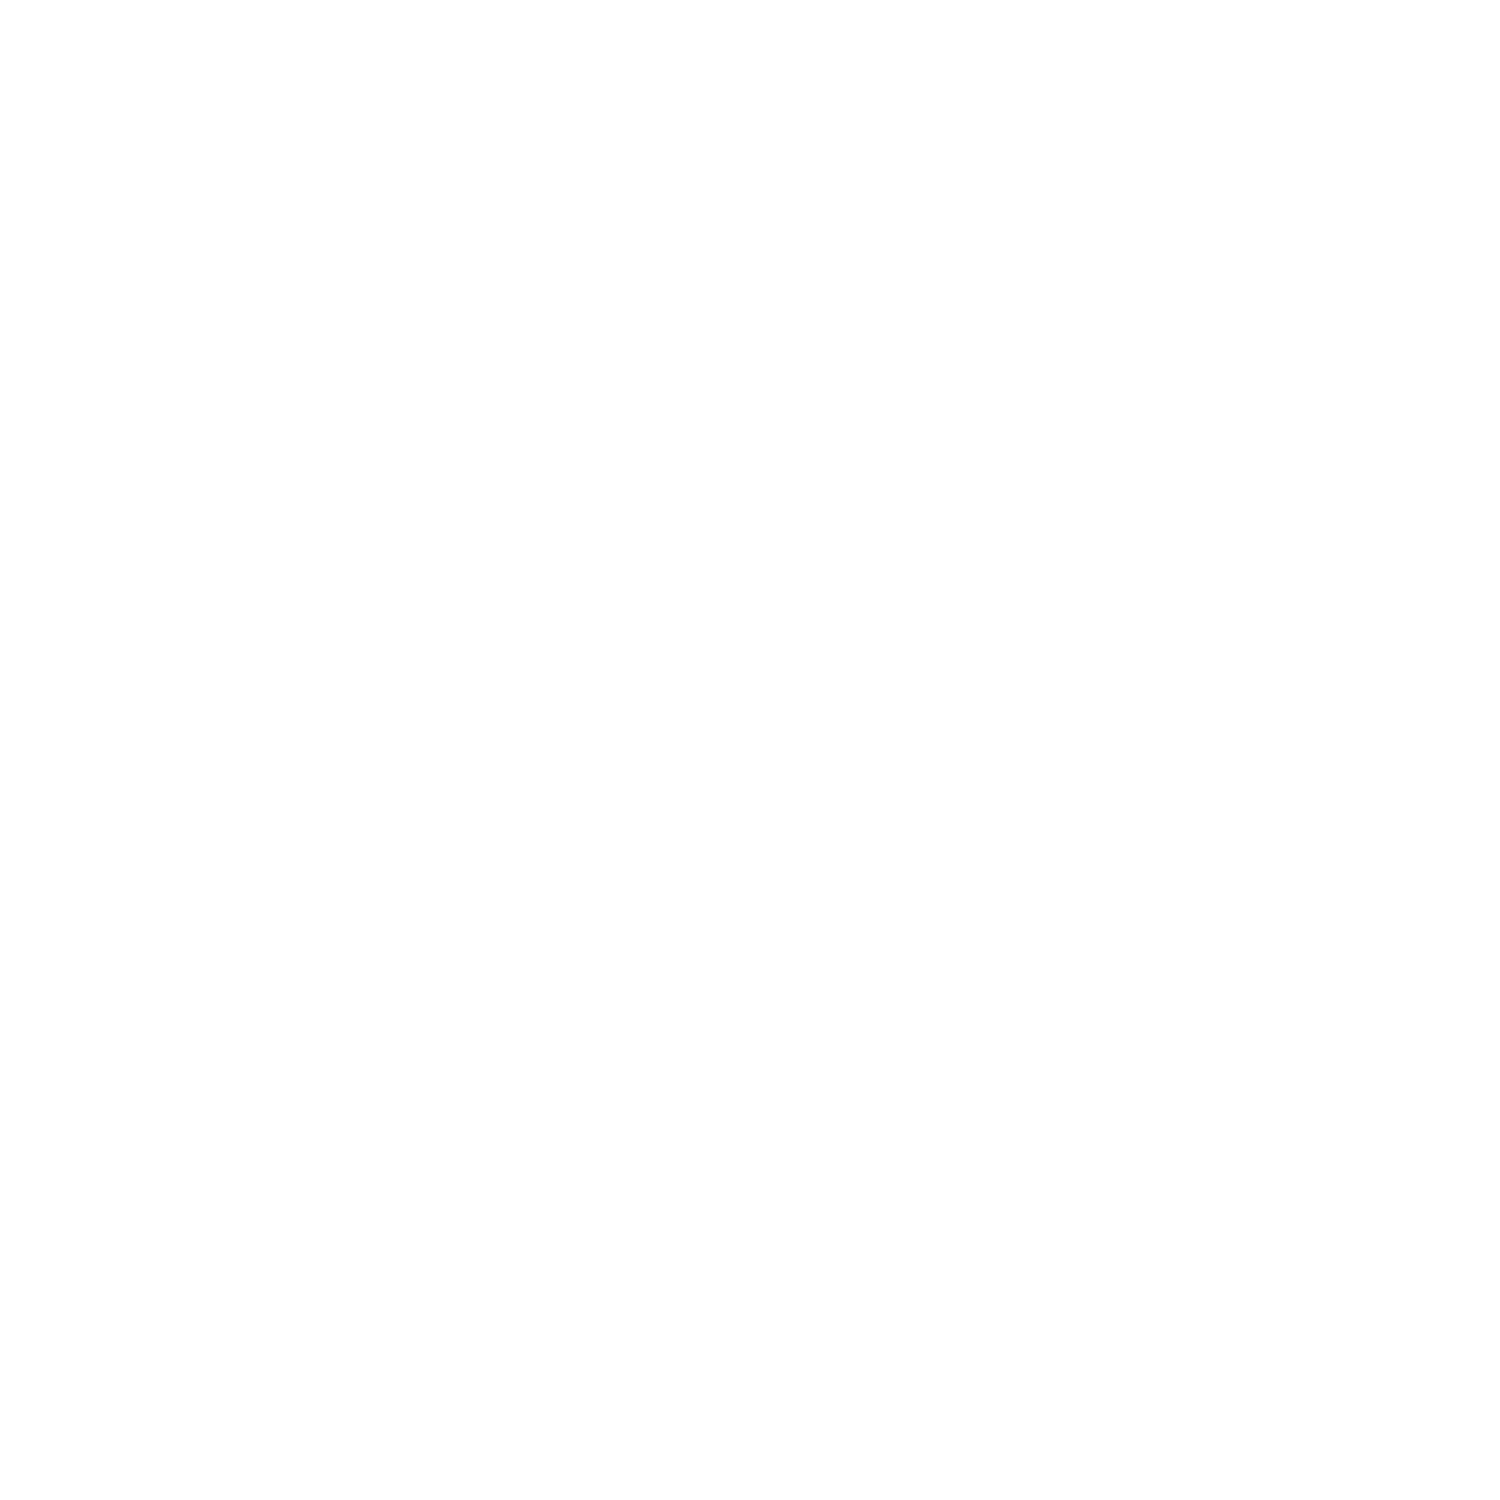 The Outback Pizza Company